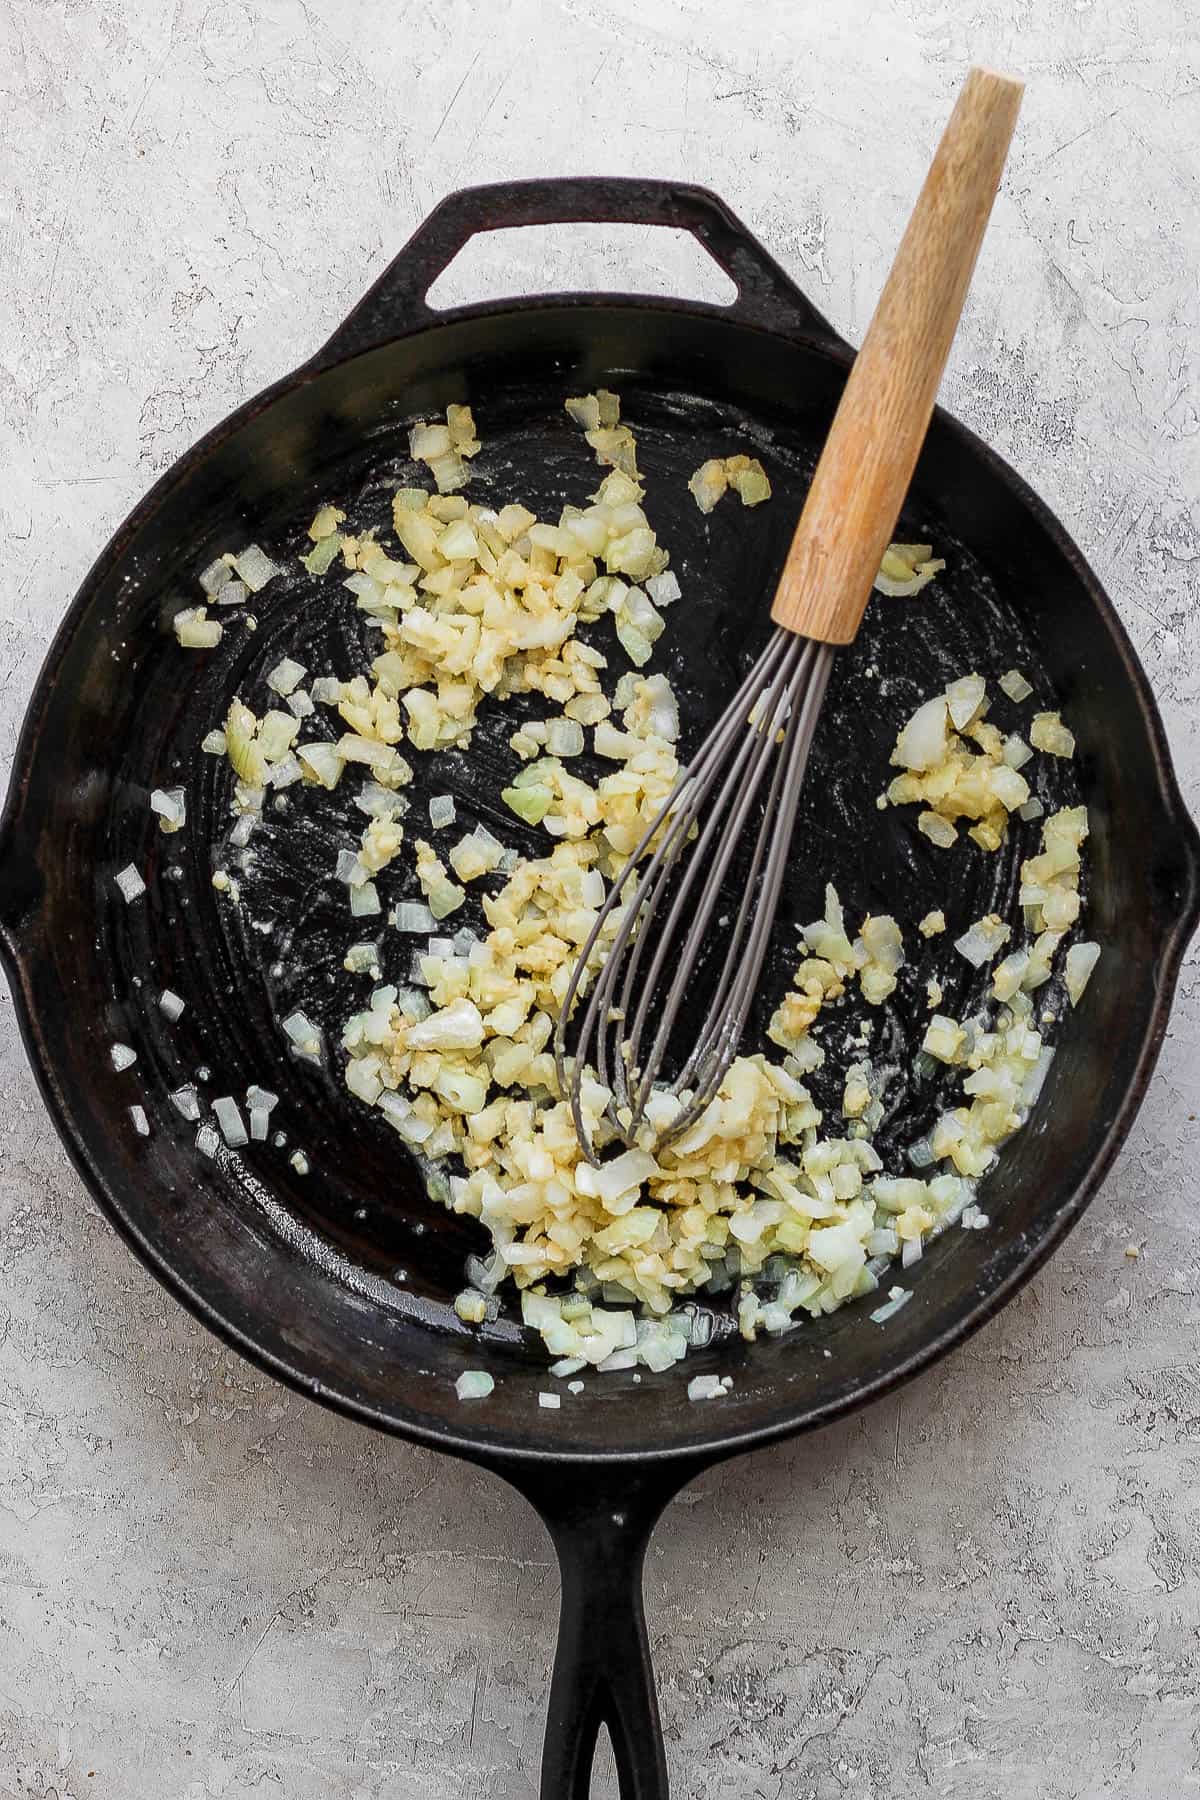 Flour whisked into the butter, onion, and garlic in a large skillet.